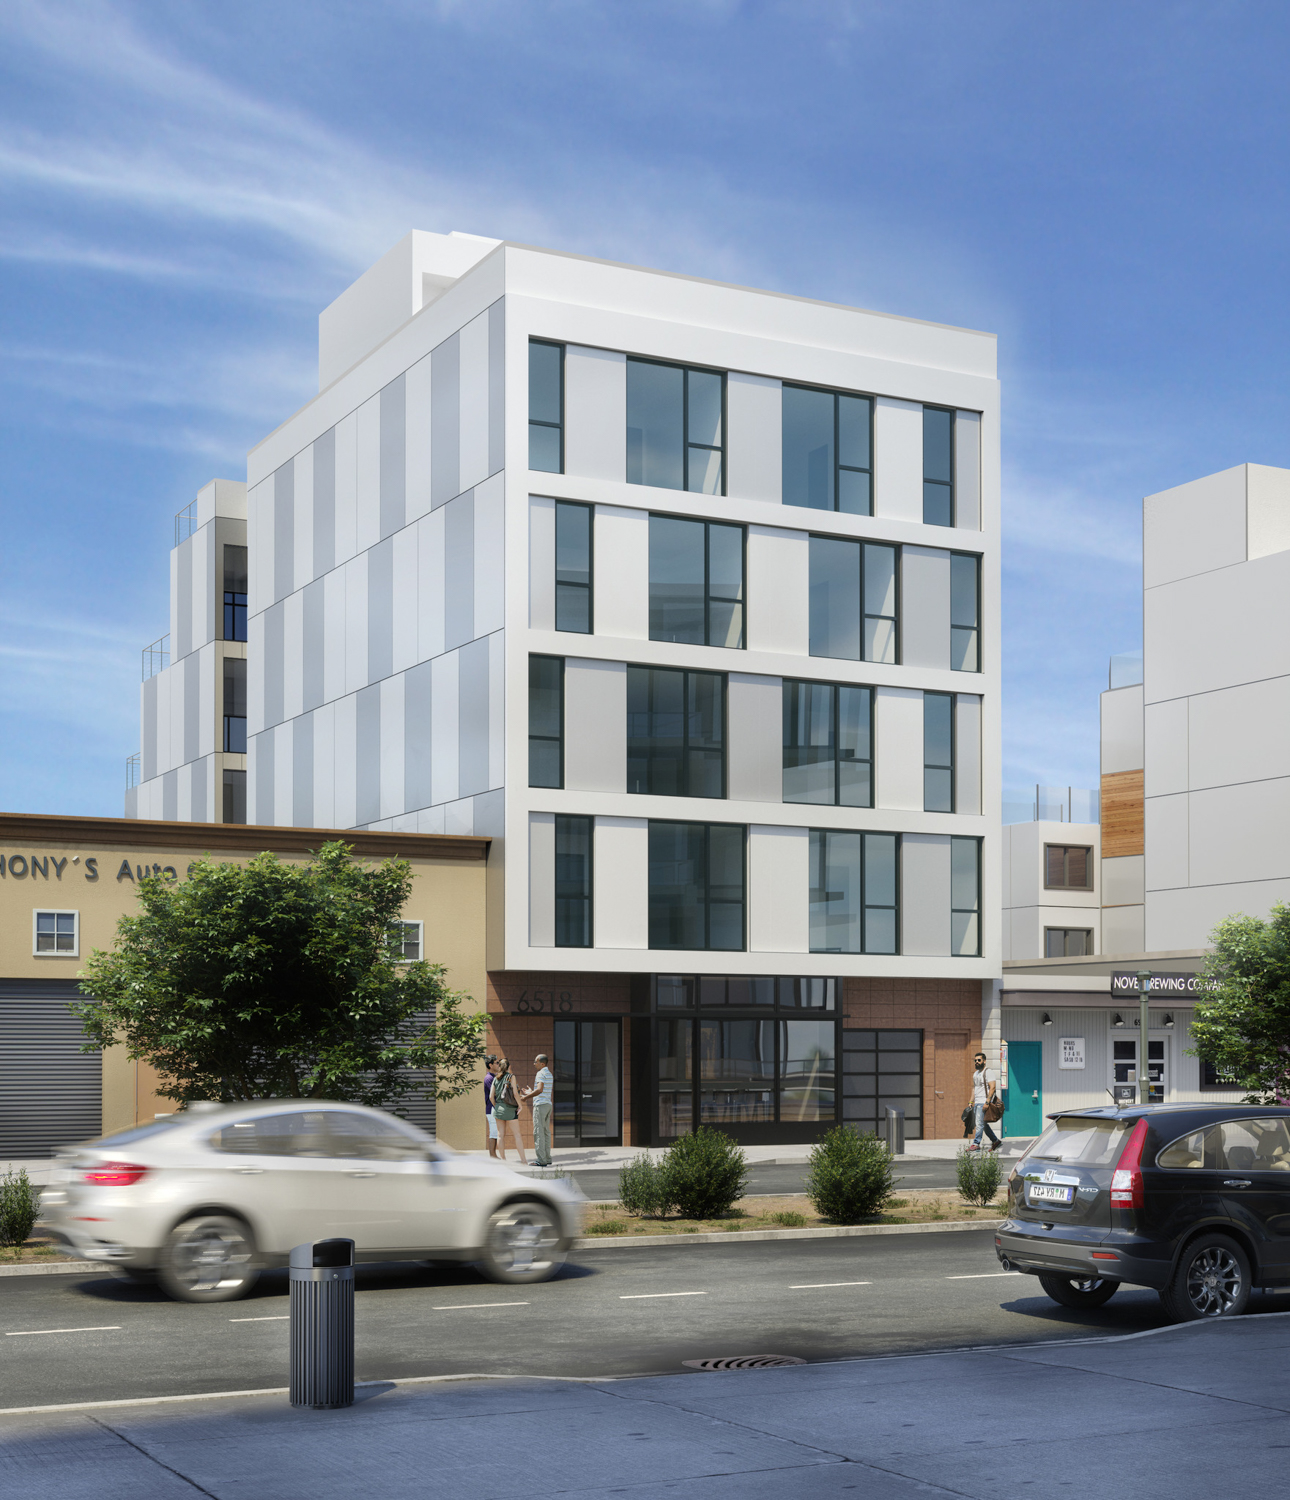 Older rendering of 6518 San Pablo Avenue reflecting the scale of the 2019 permit, development by Atomic Development Company